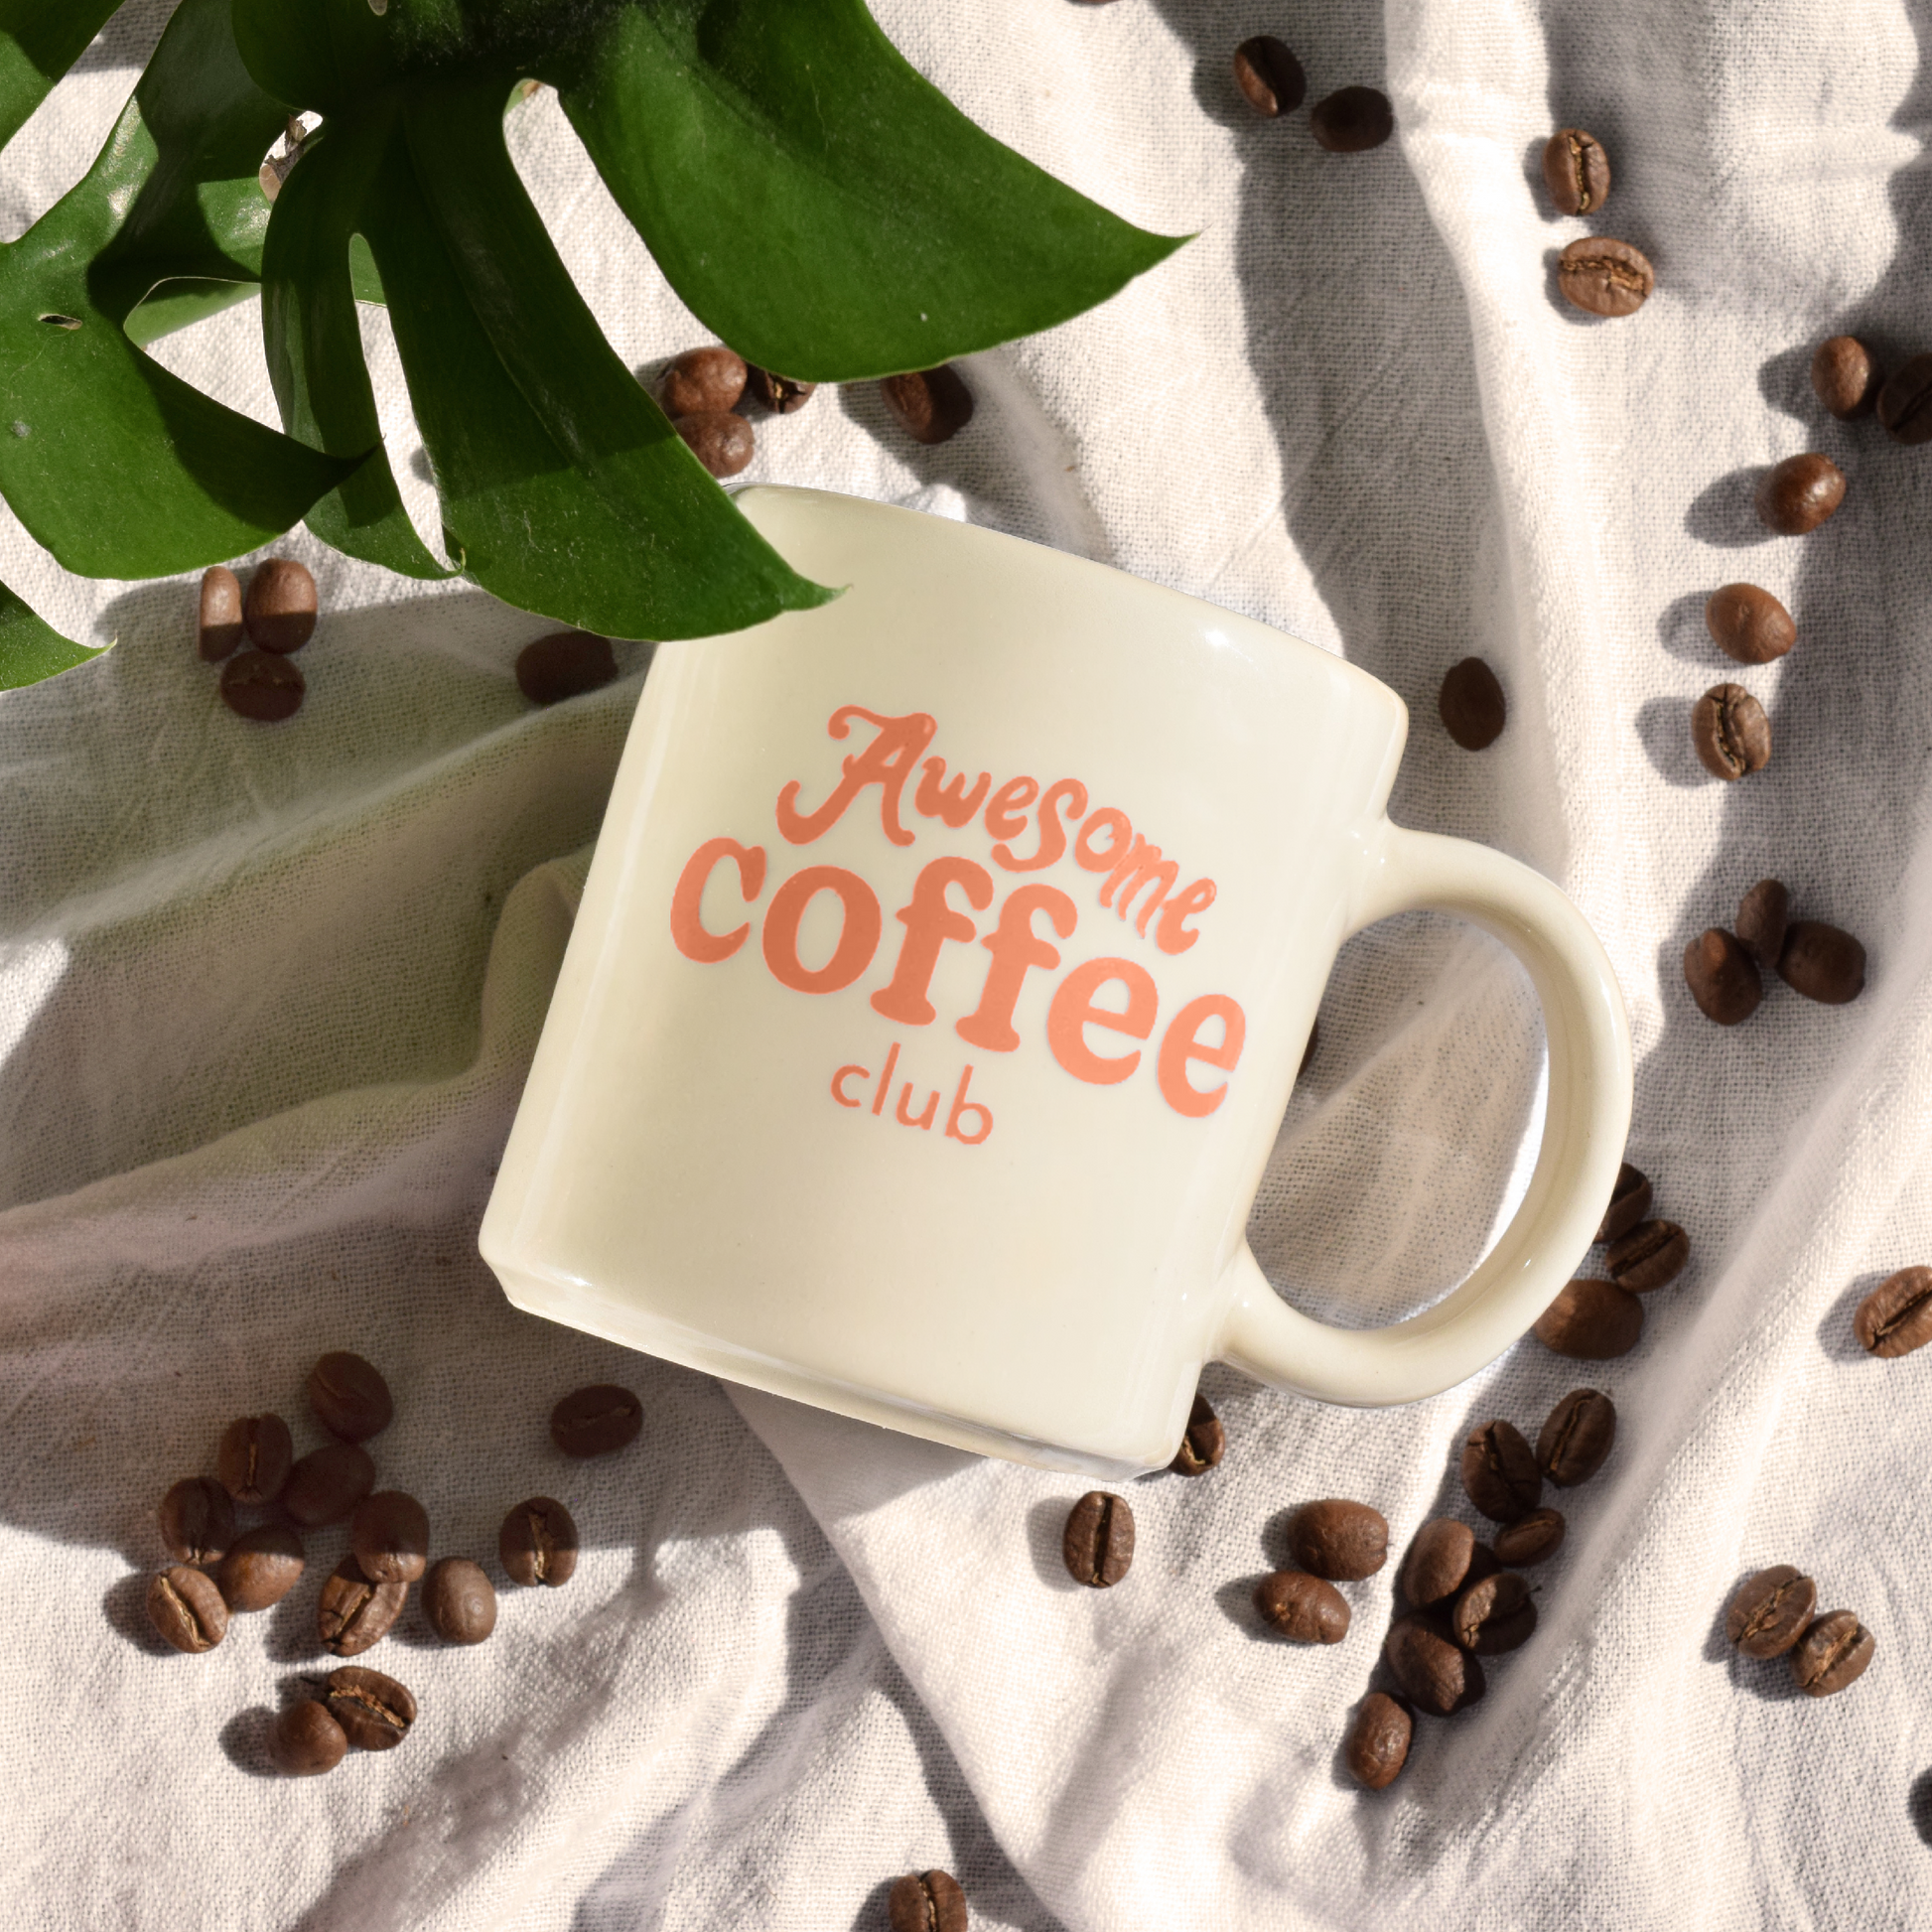 White cafe mug with "Awesome Coffee Club" written in orange. The mug is laid on a sheet with a plant in the corner and coffee beans surrounding it.